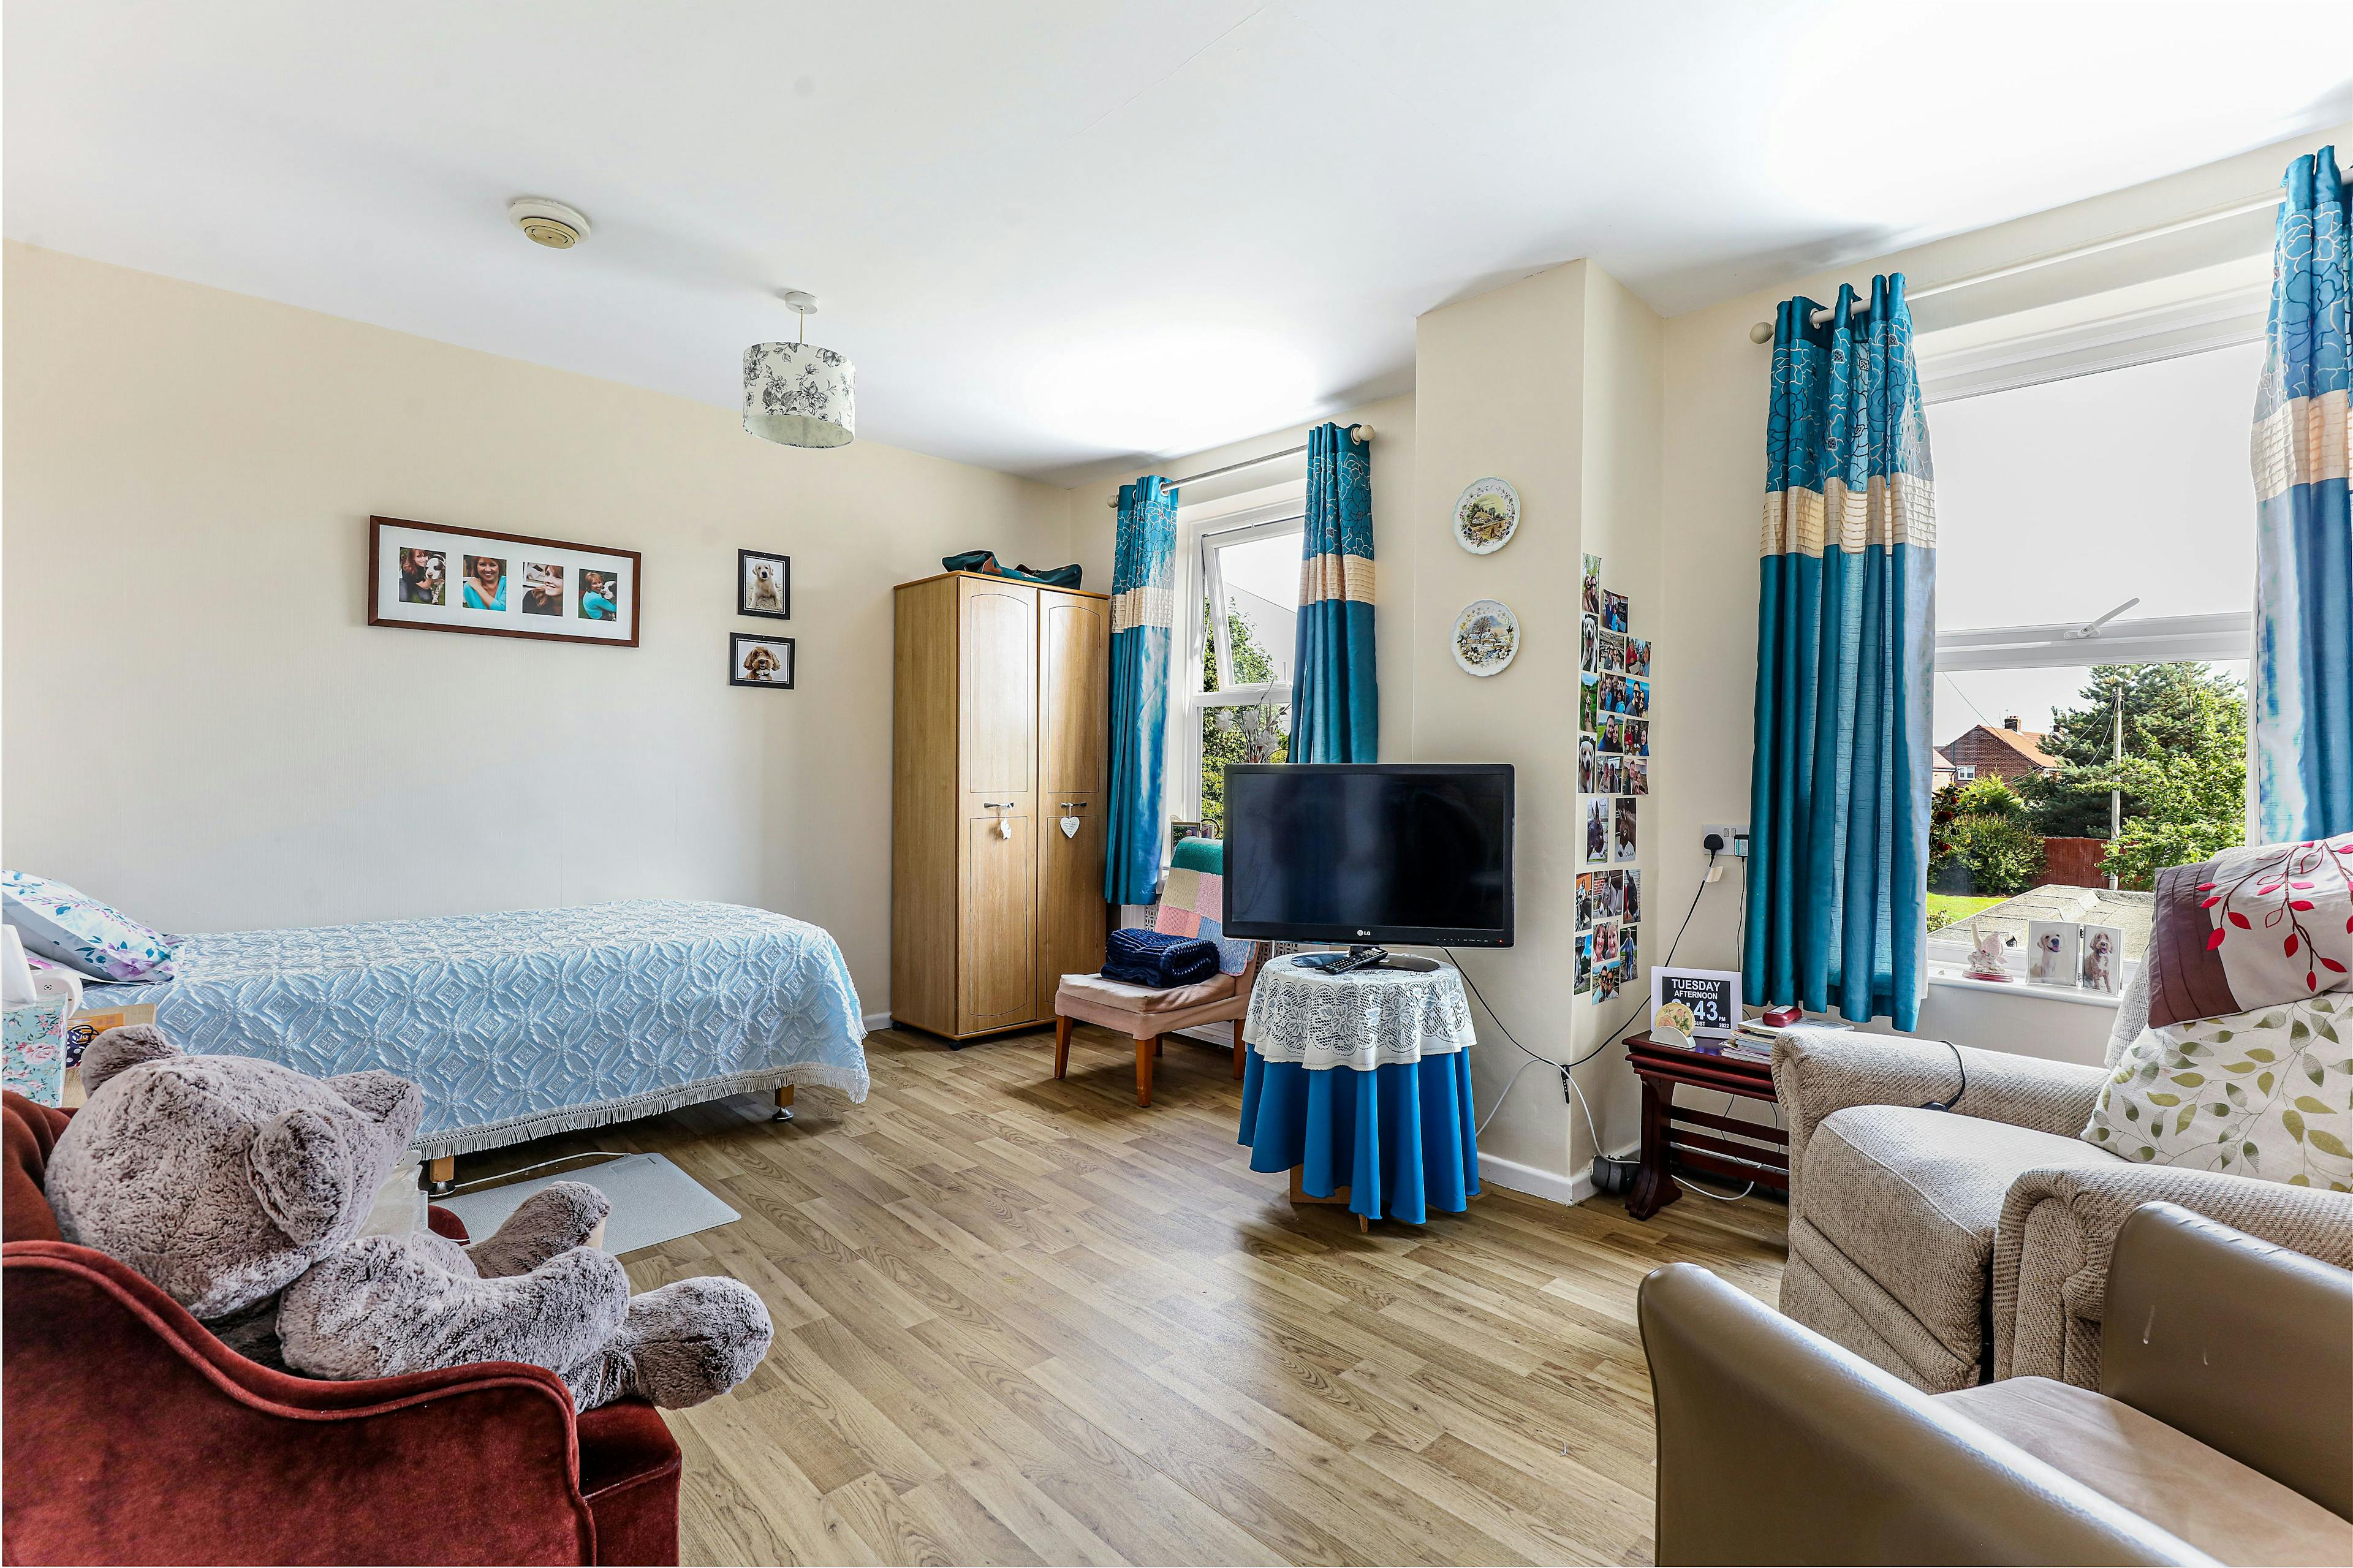 Minster Care Group - The Laurels care home 2